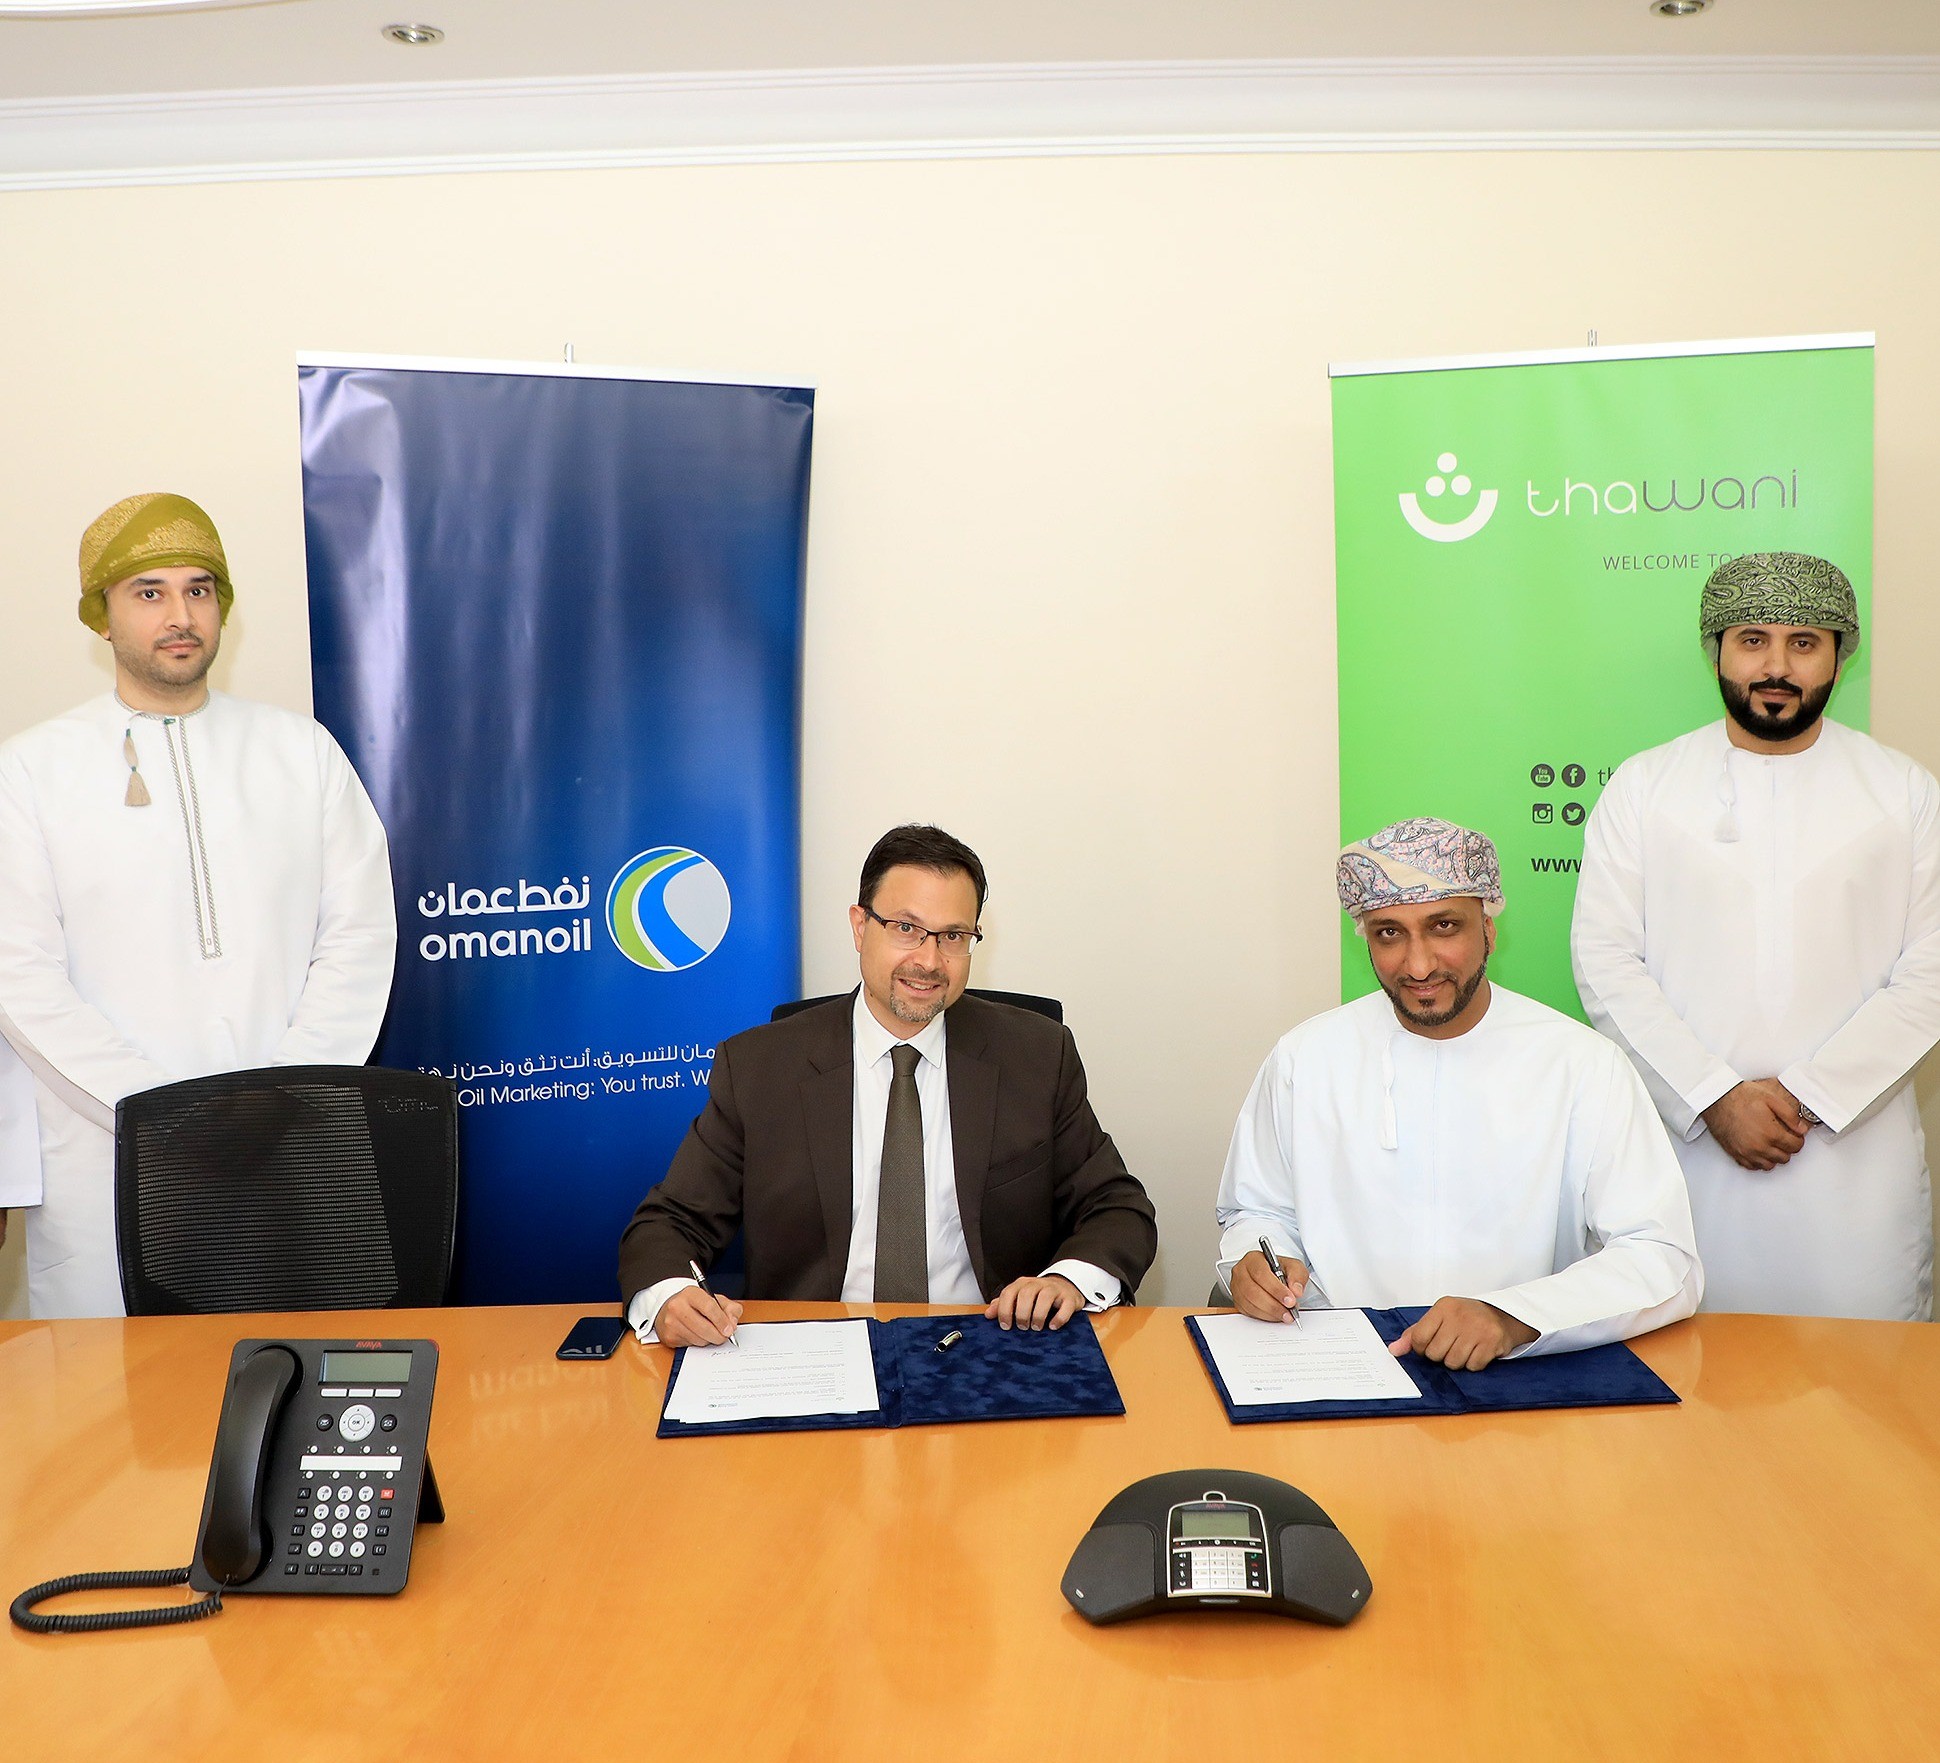 Rolling out Enhanced "Thawani" Mobile Payment Solutions